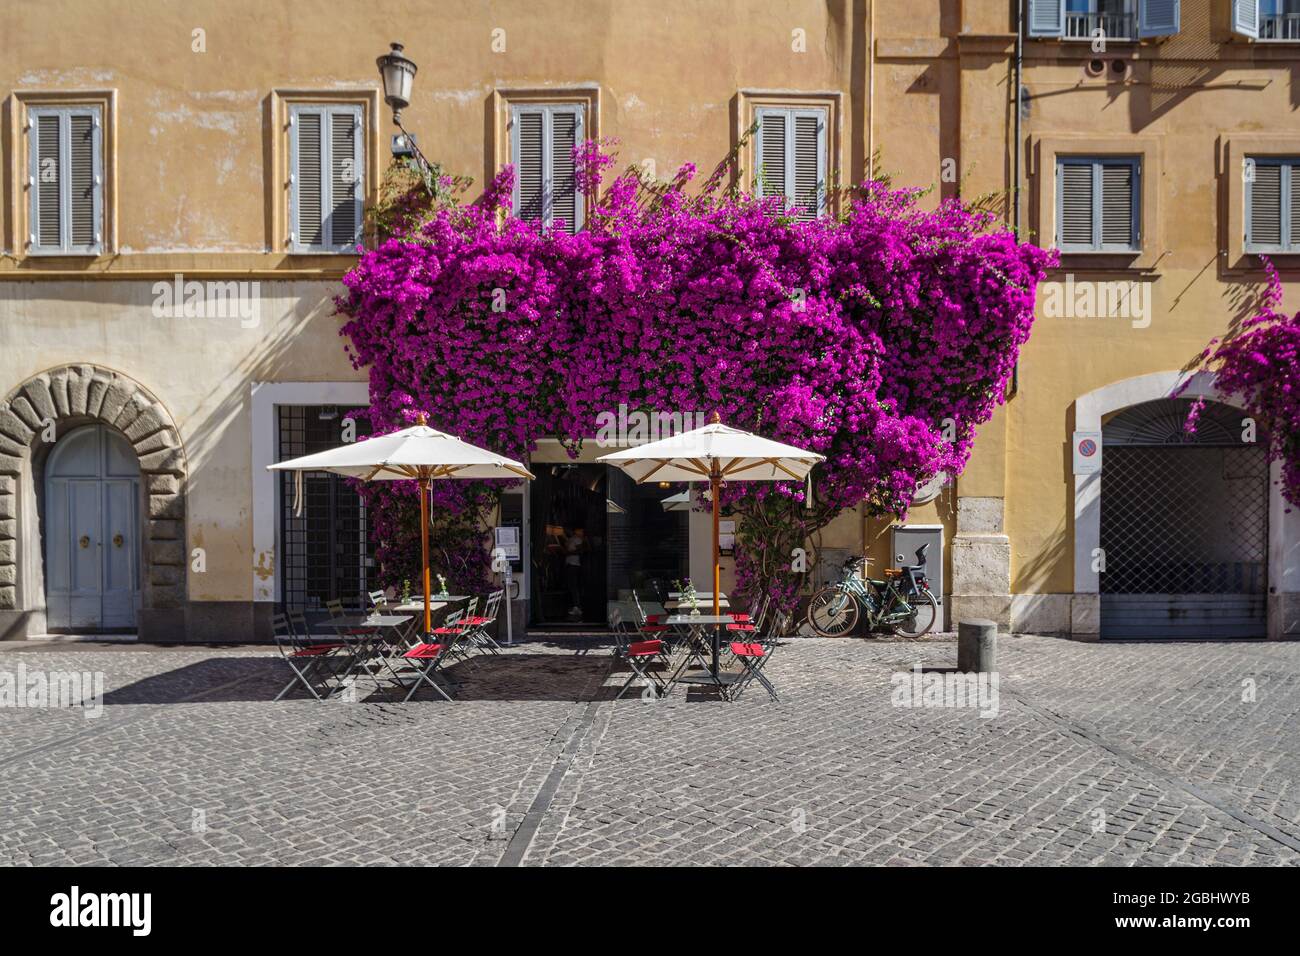 Bougainvillea flowers in bloom around a facade of house in Rome old town, Italy Stock Photo